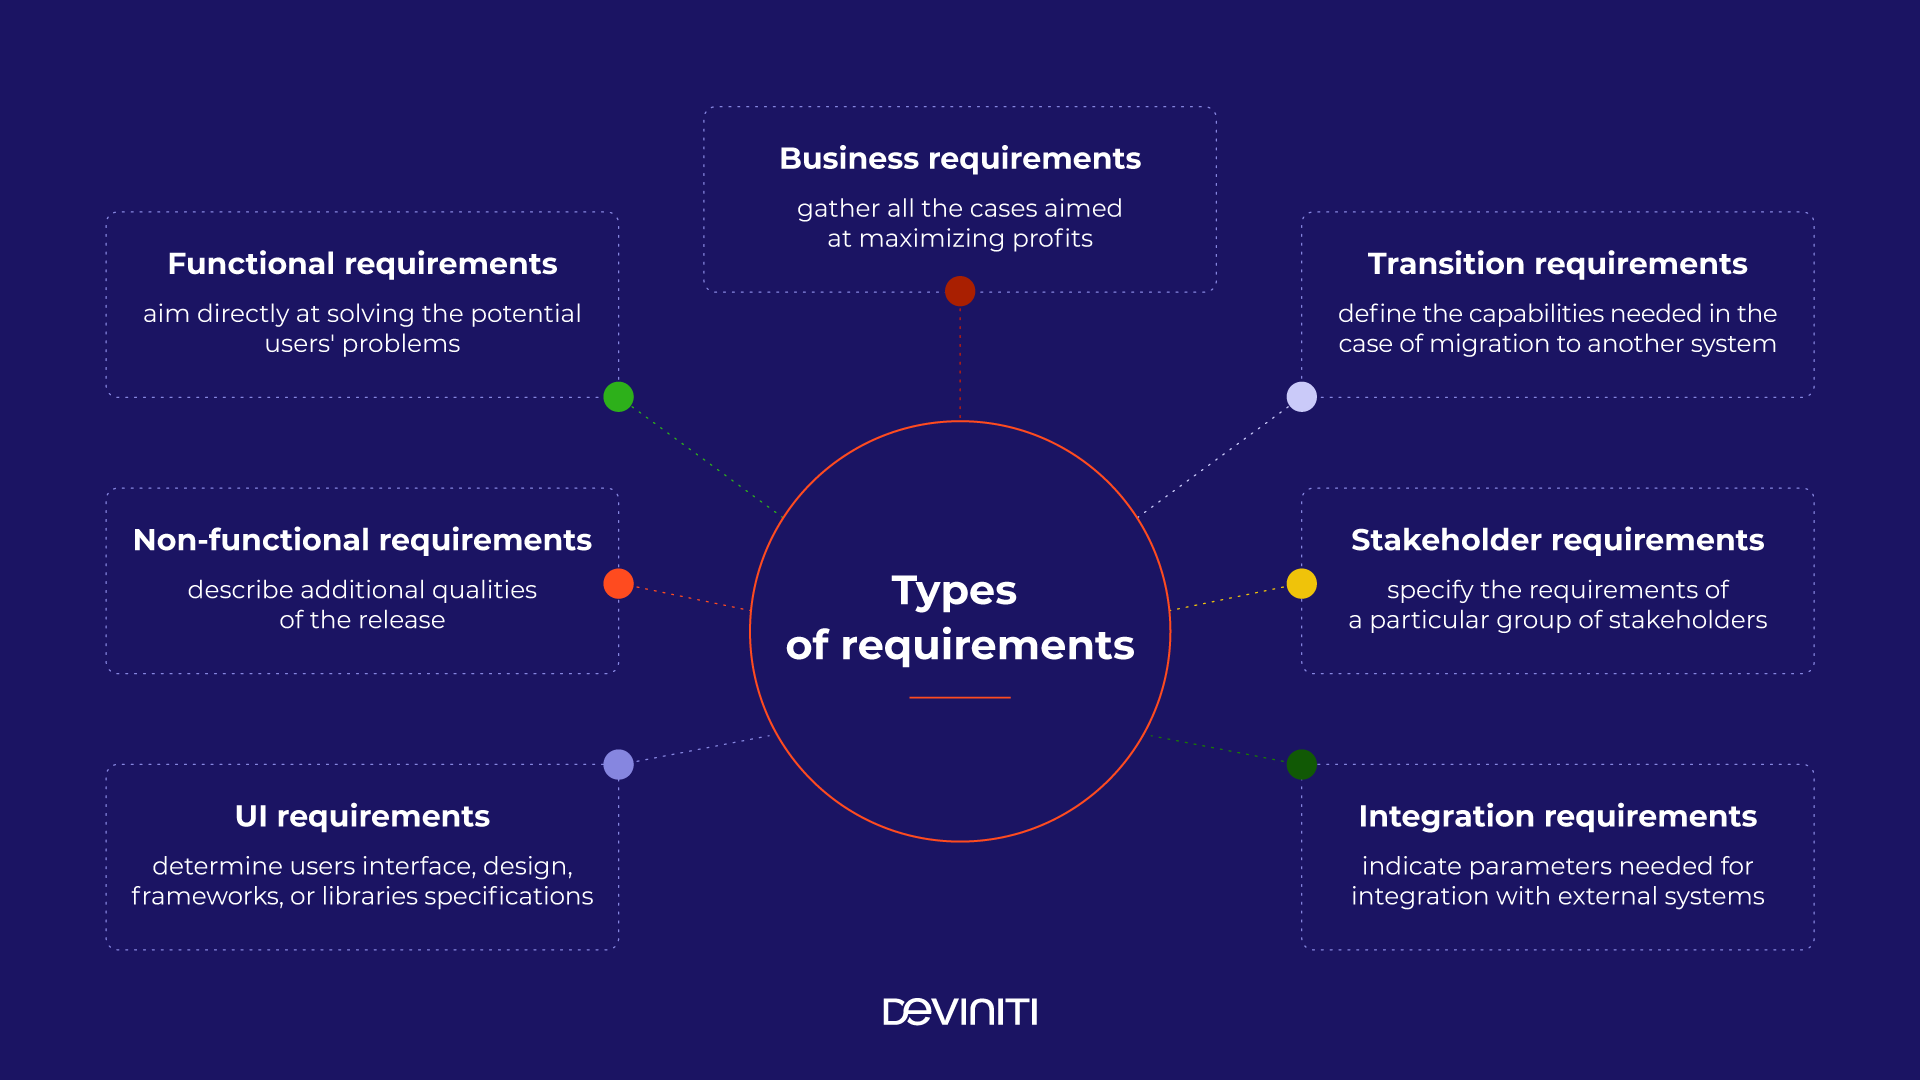 Types of requirements: Business requirements, Transition requirements, Stakeholder requirements, Integration requirements, UI requirements, Non-functional requirements, Functional requirements